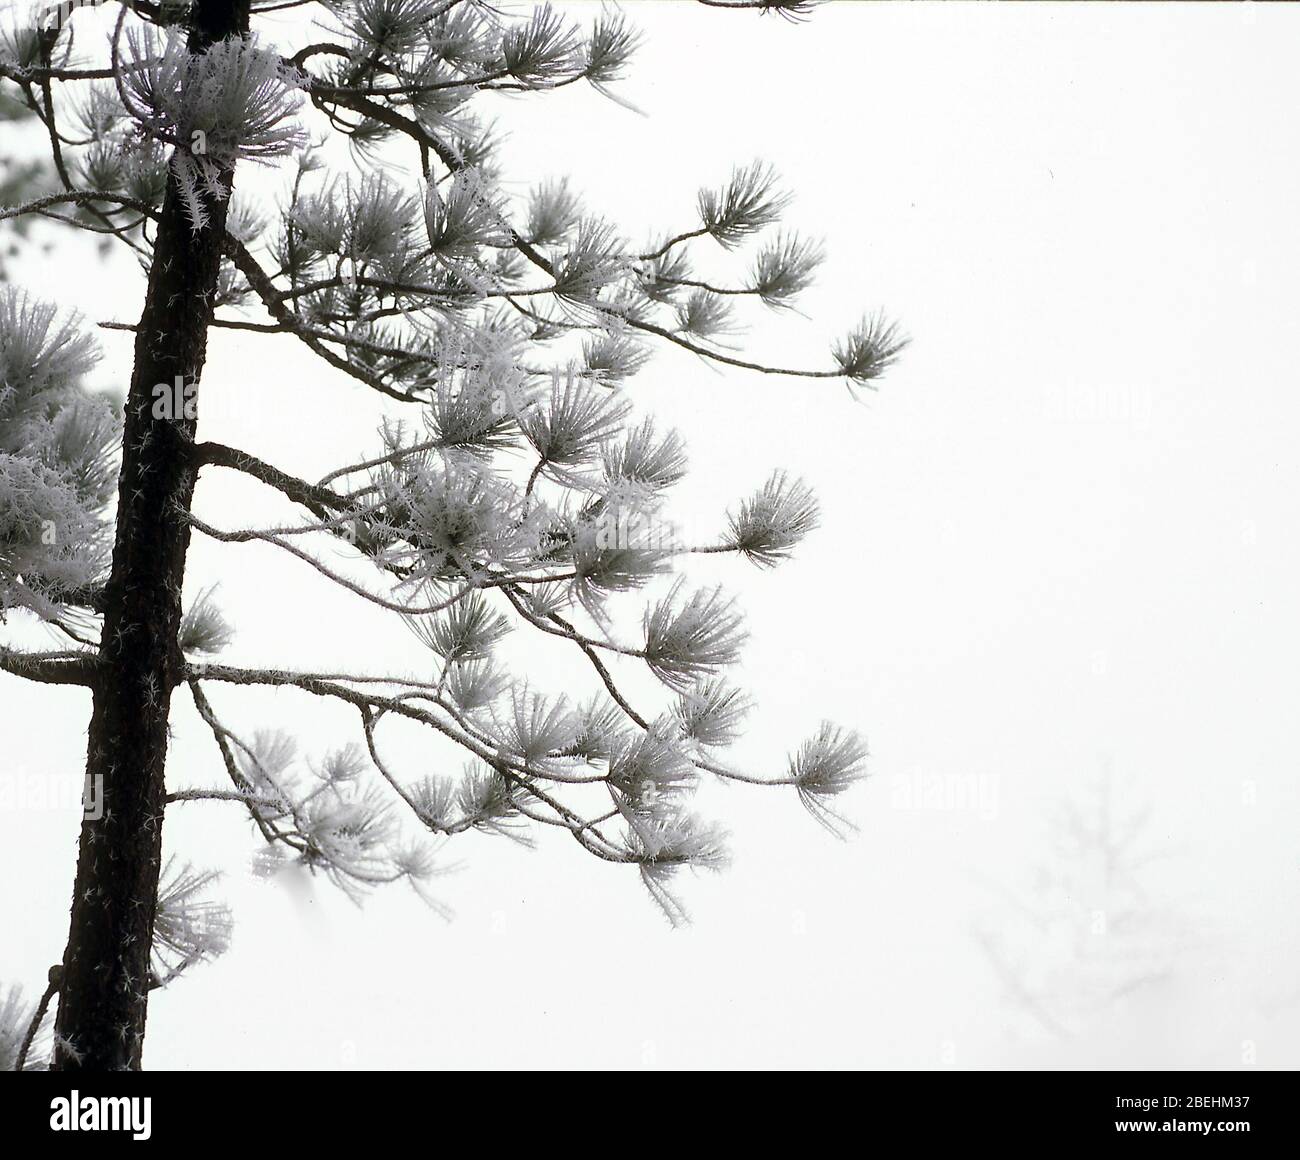 Ponderosa pine tree branches and trunk in winter. Stock Photo